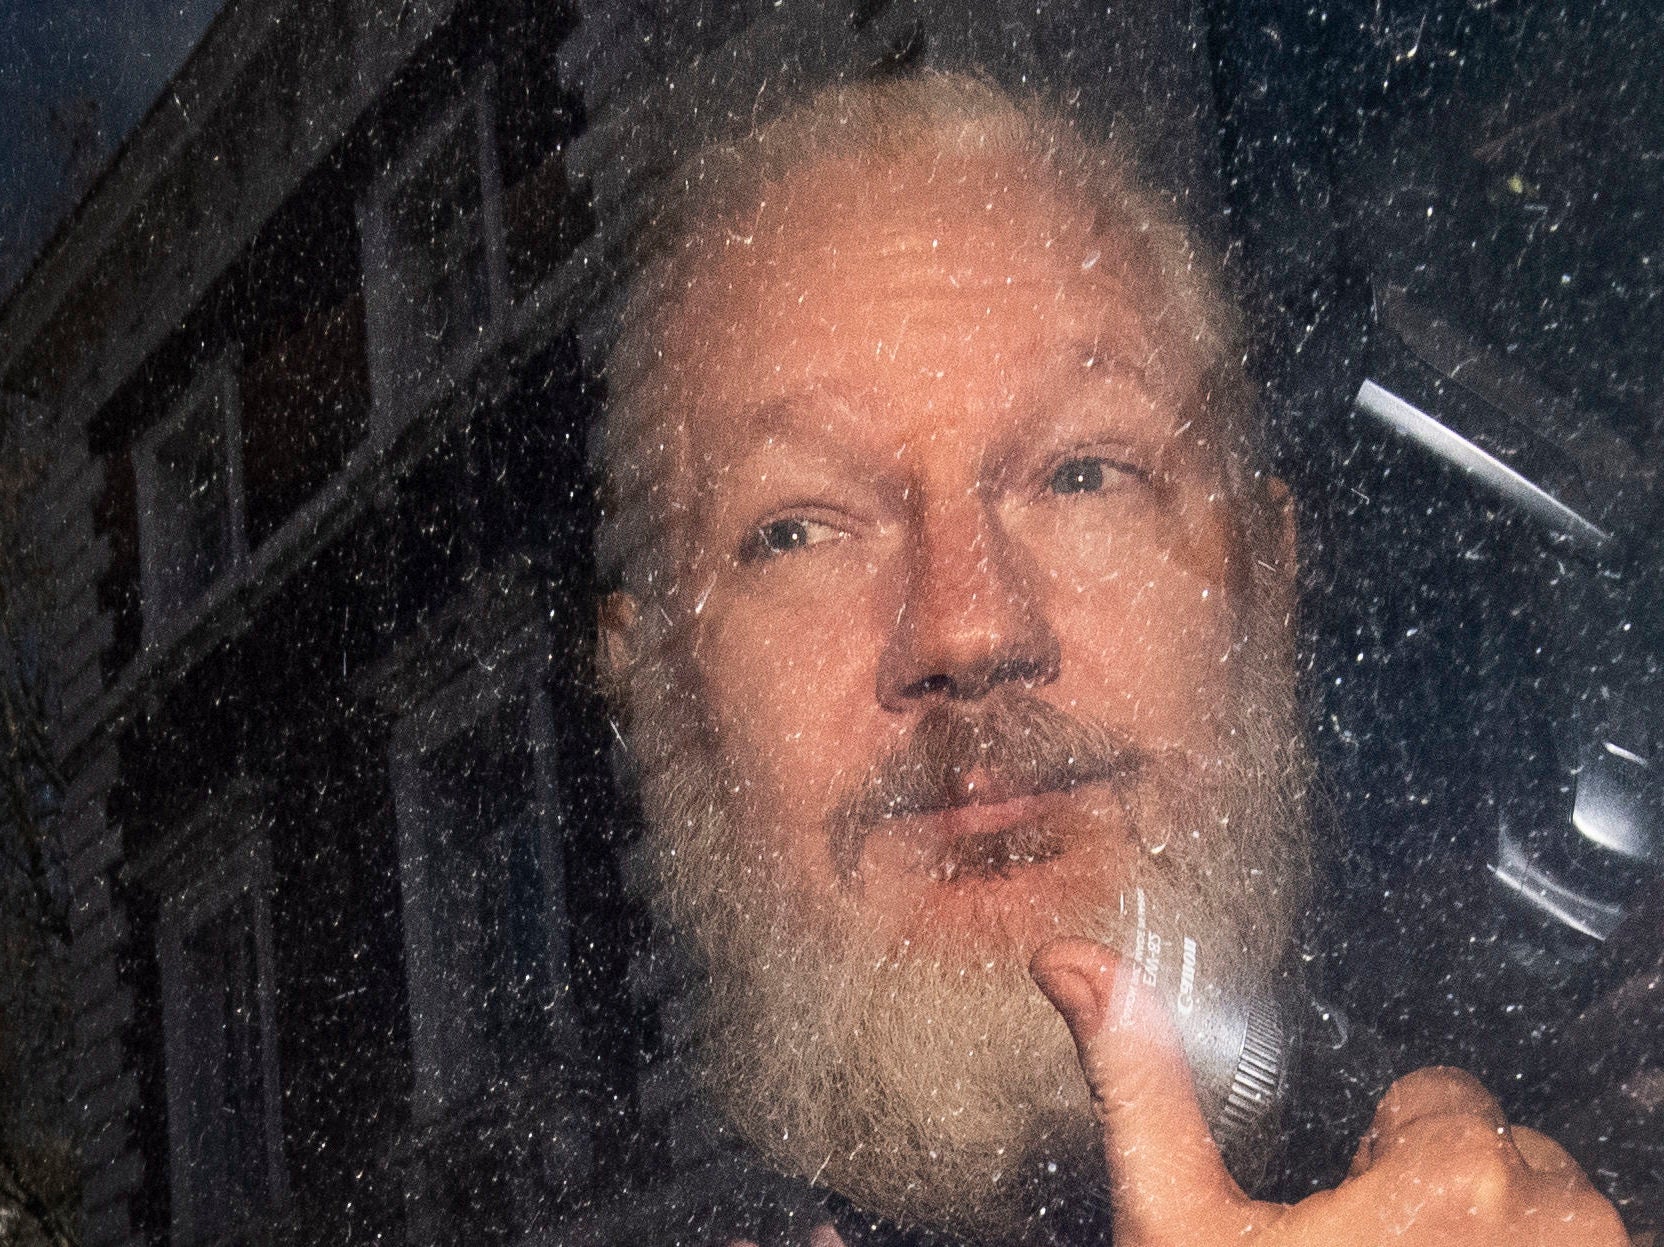 'Dark day for press freedom' as Priti Patel approves Julian Assange extradition